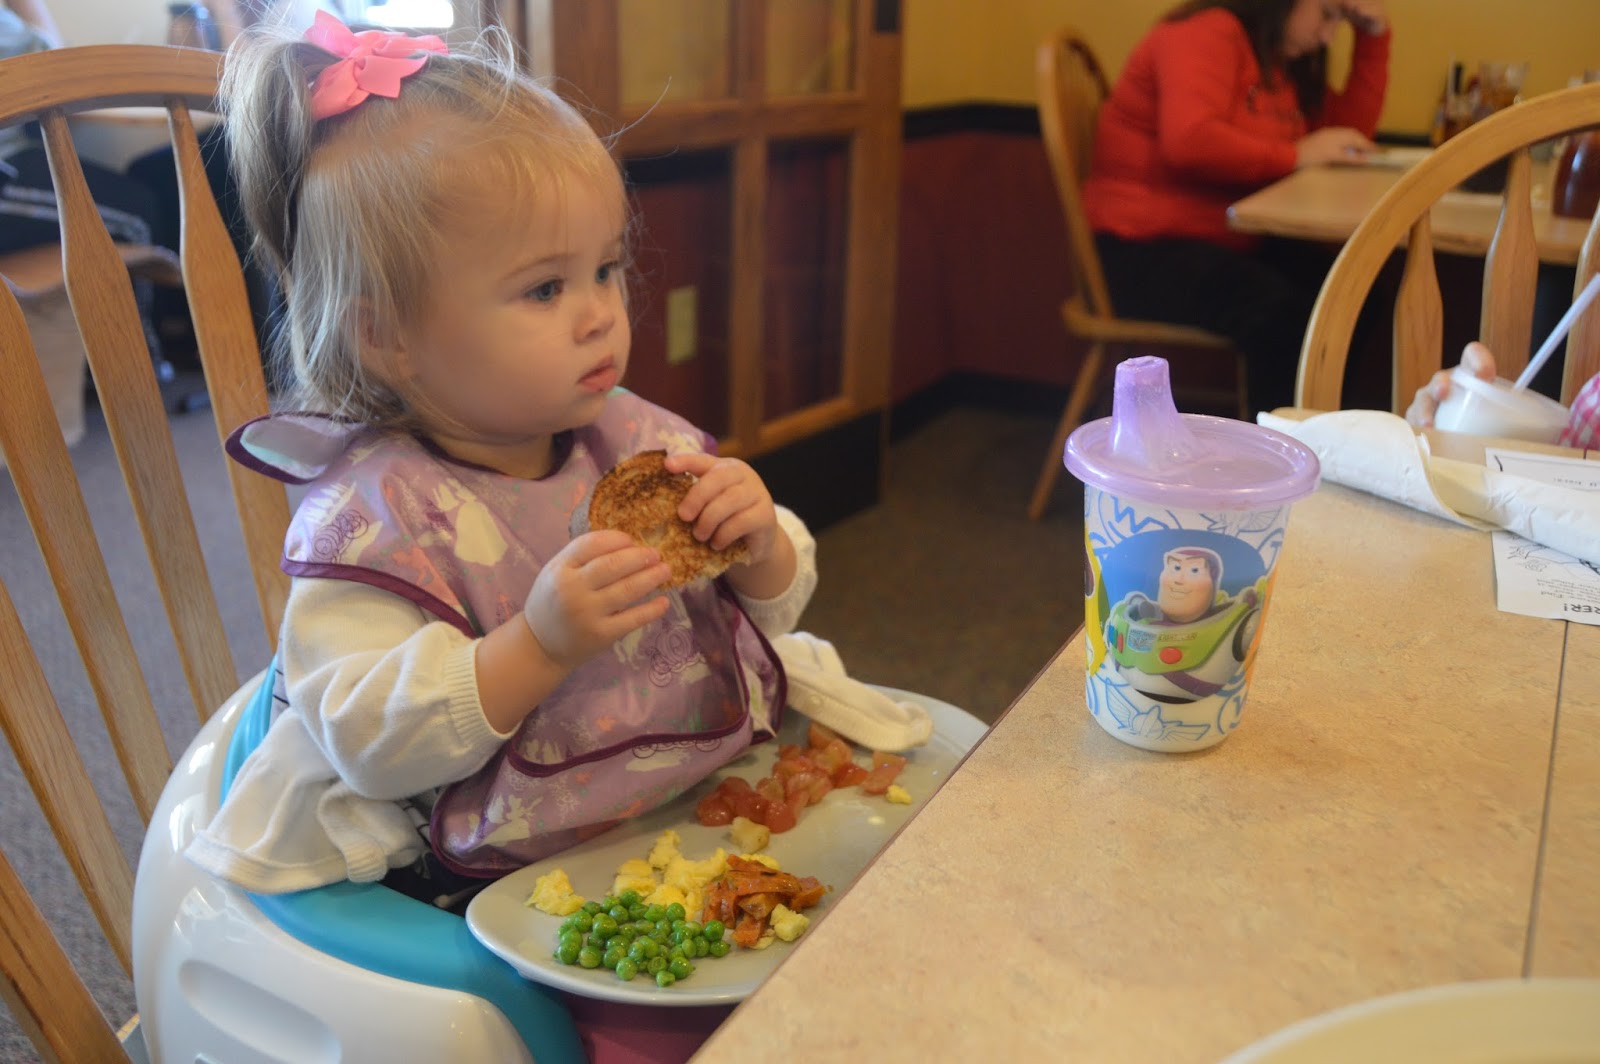 Take Your Toddler to Brunch with Bumbo! - The Journey of Parenthood...